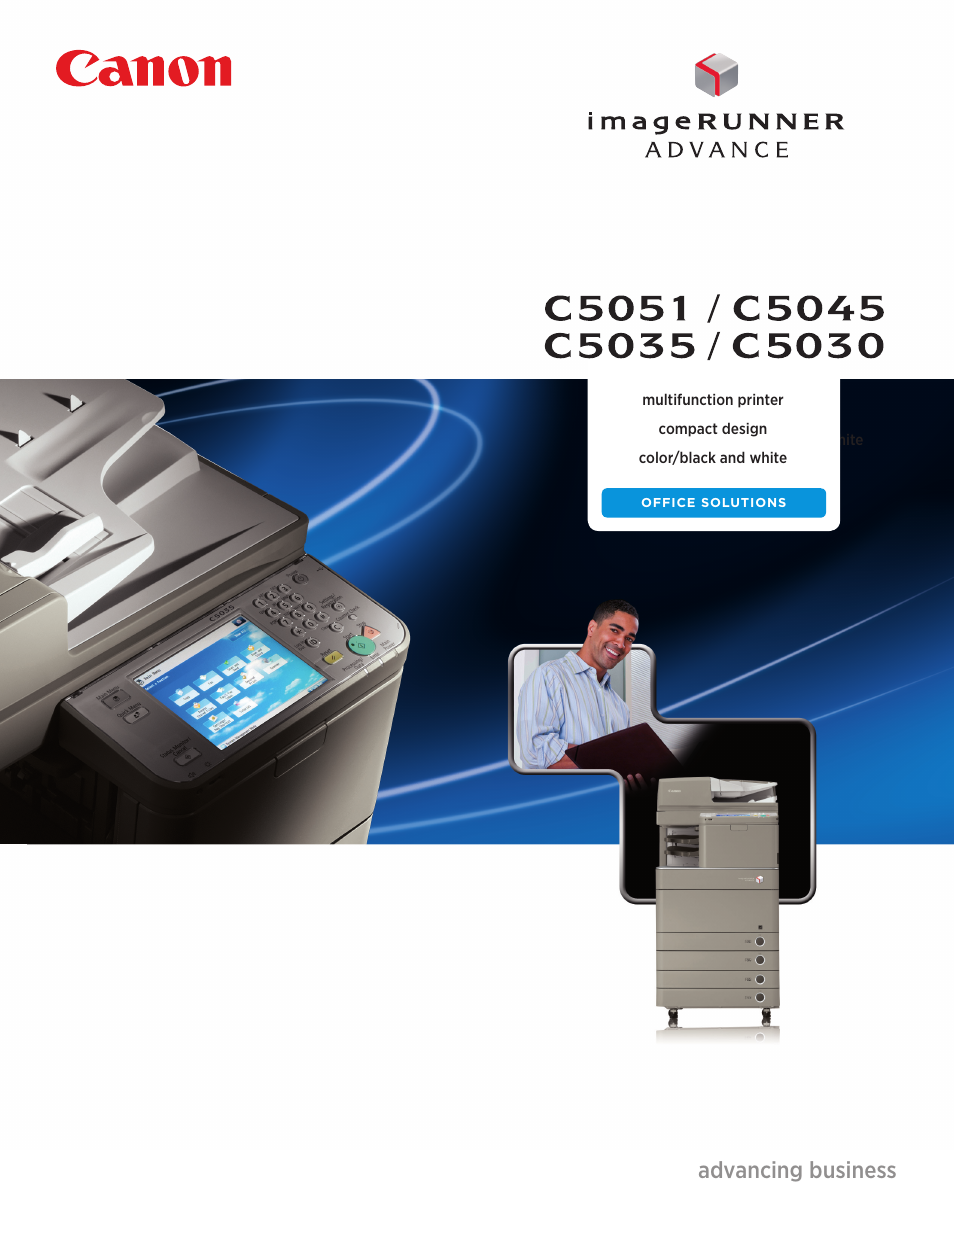 Canon IMAGERUNNER ADVANCE C5051 User Manual | 12 pages | Also for